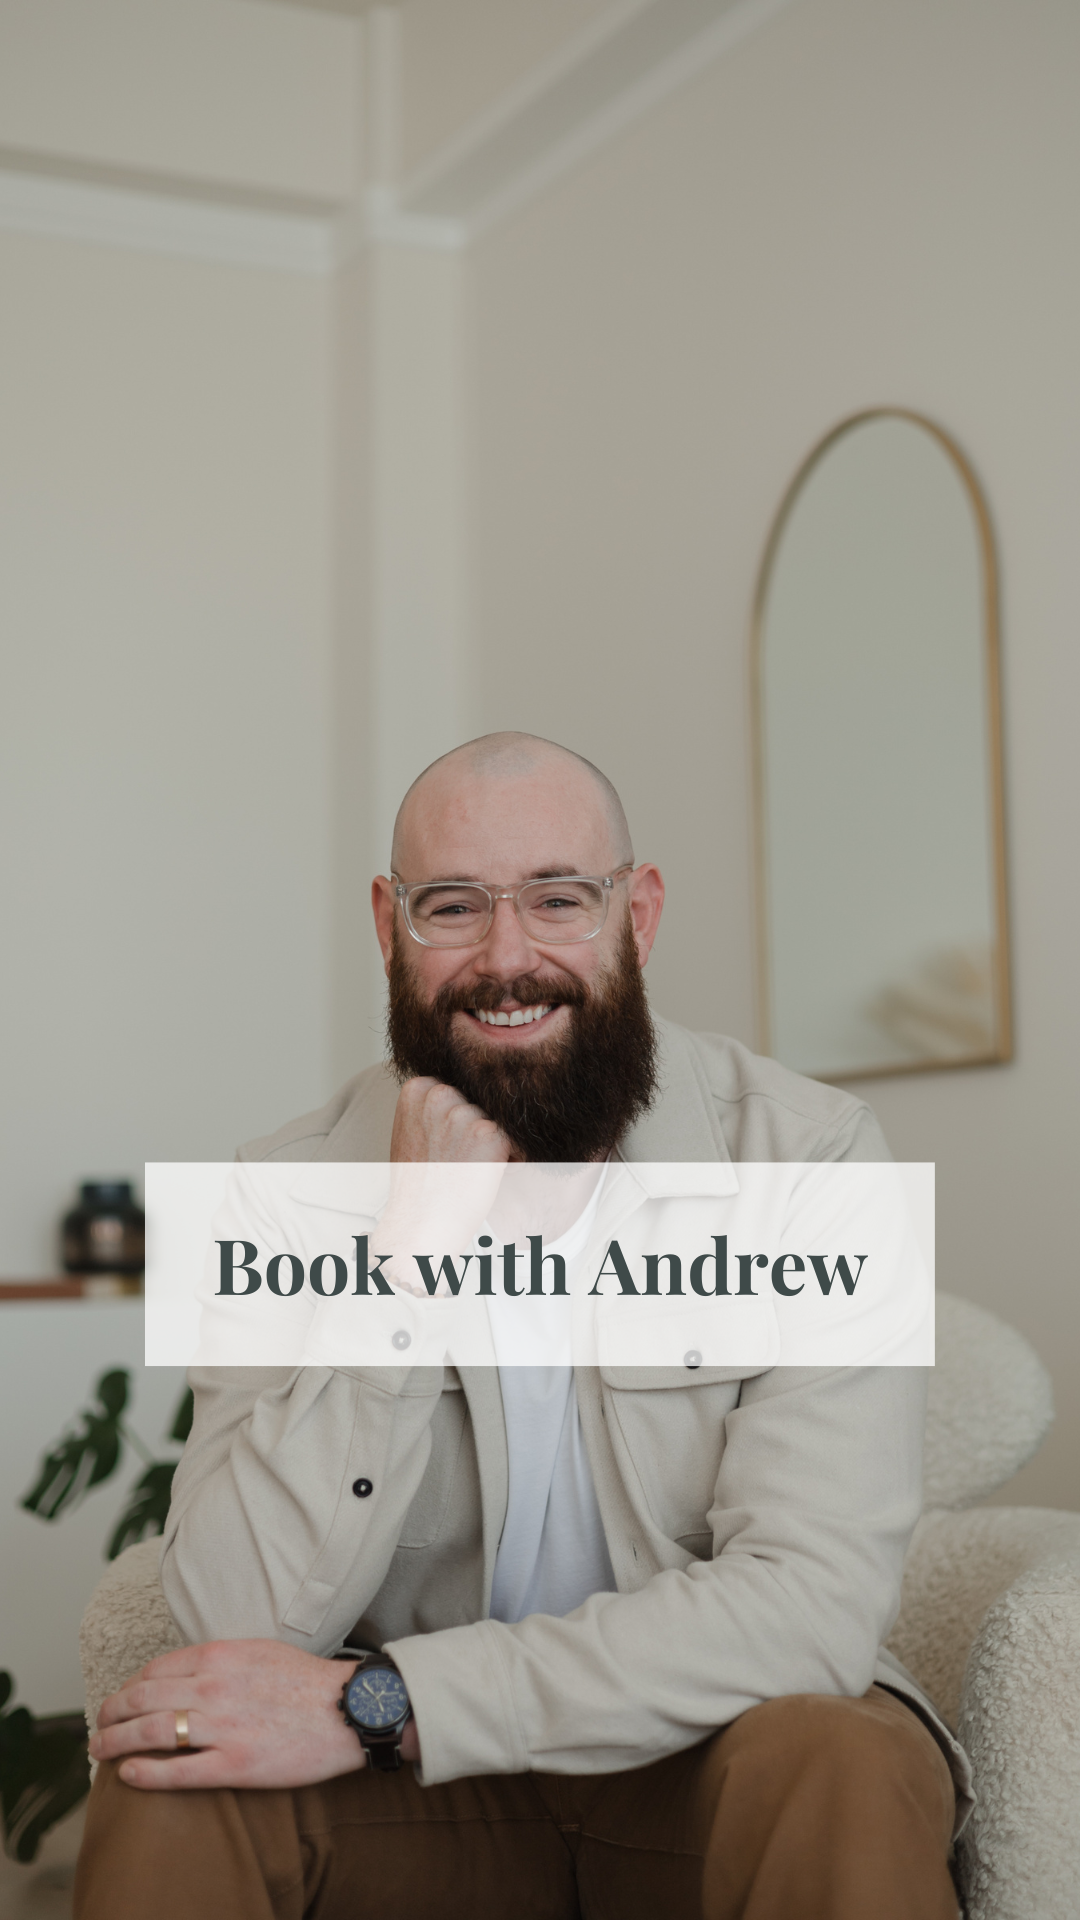 Andrew FitzGerald, experienced counsellor at Attached Counselling Co. in Calgary, click to book your appointment now.